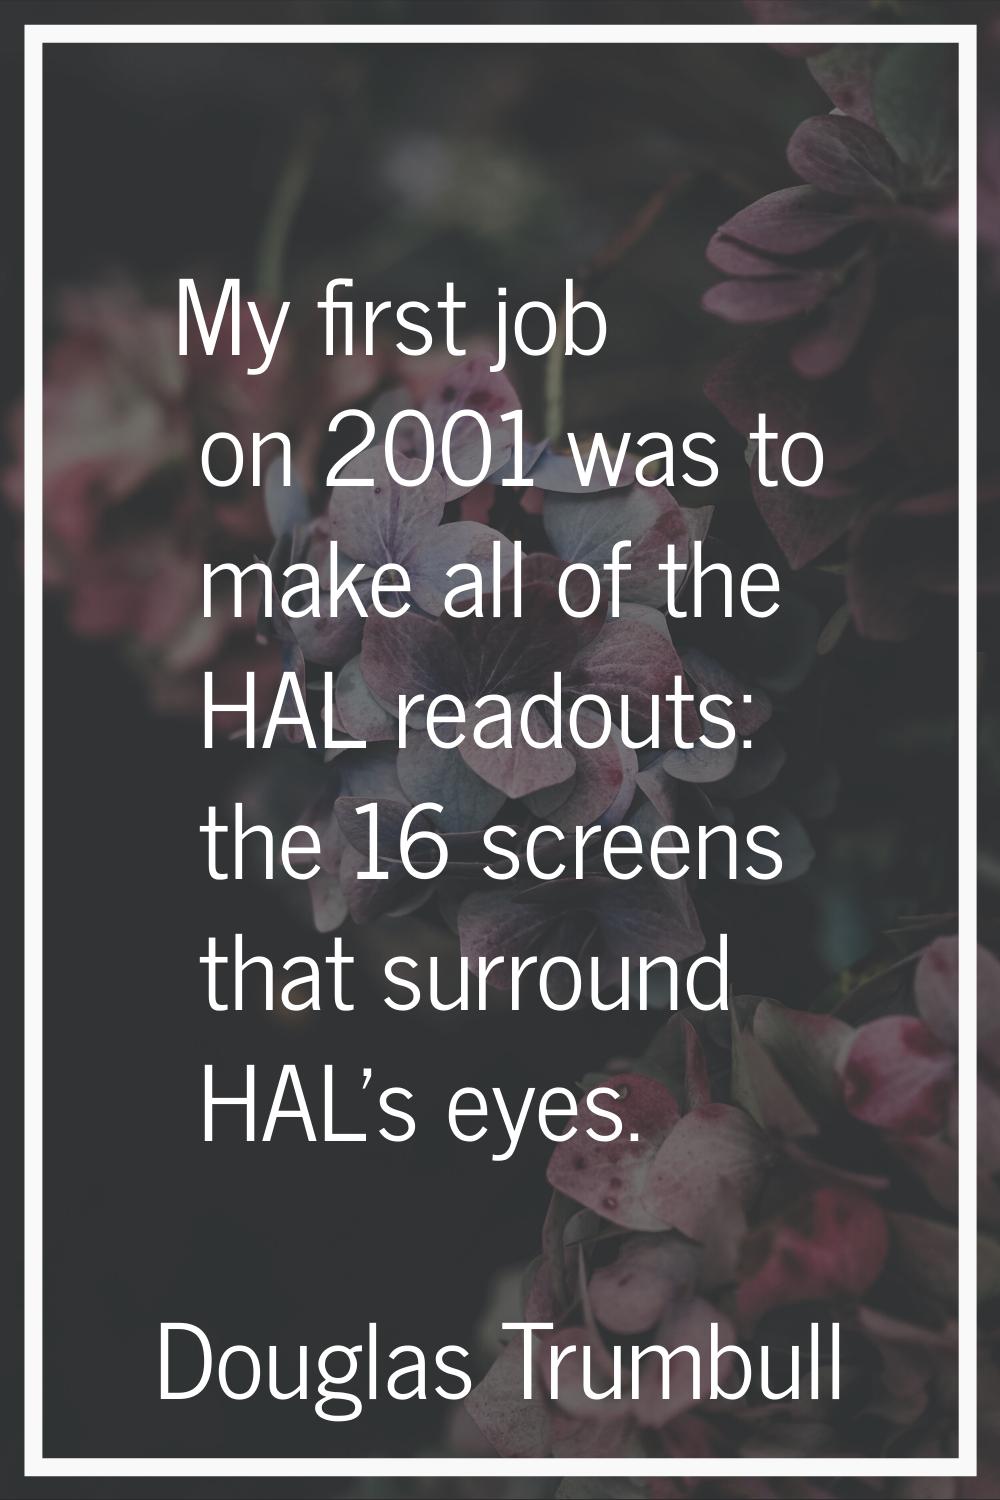 My first job on 2001 was to make all of the HAL readouts: the 16 screens that surround HAL's eyes.